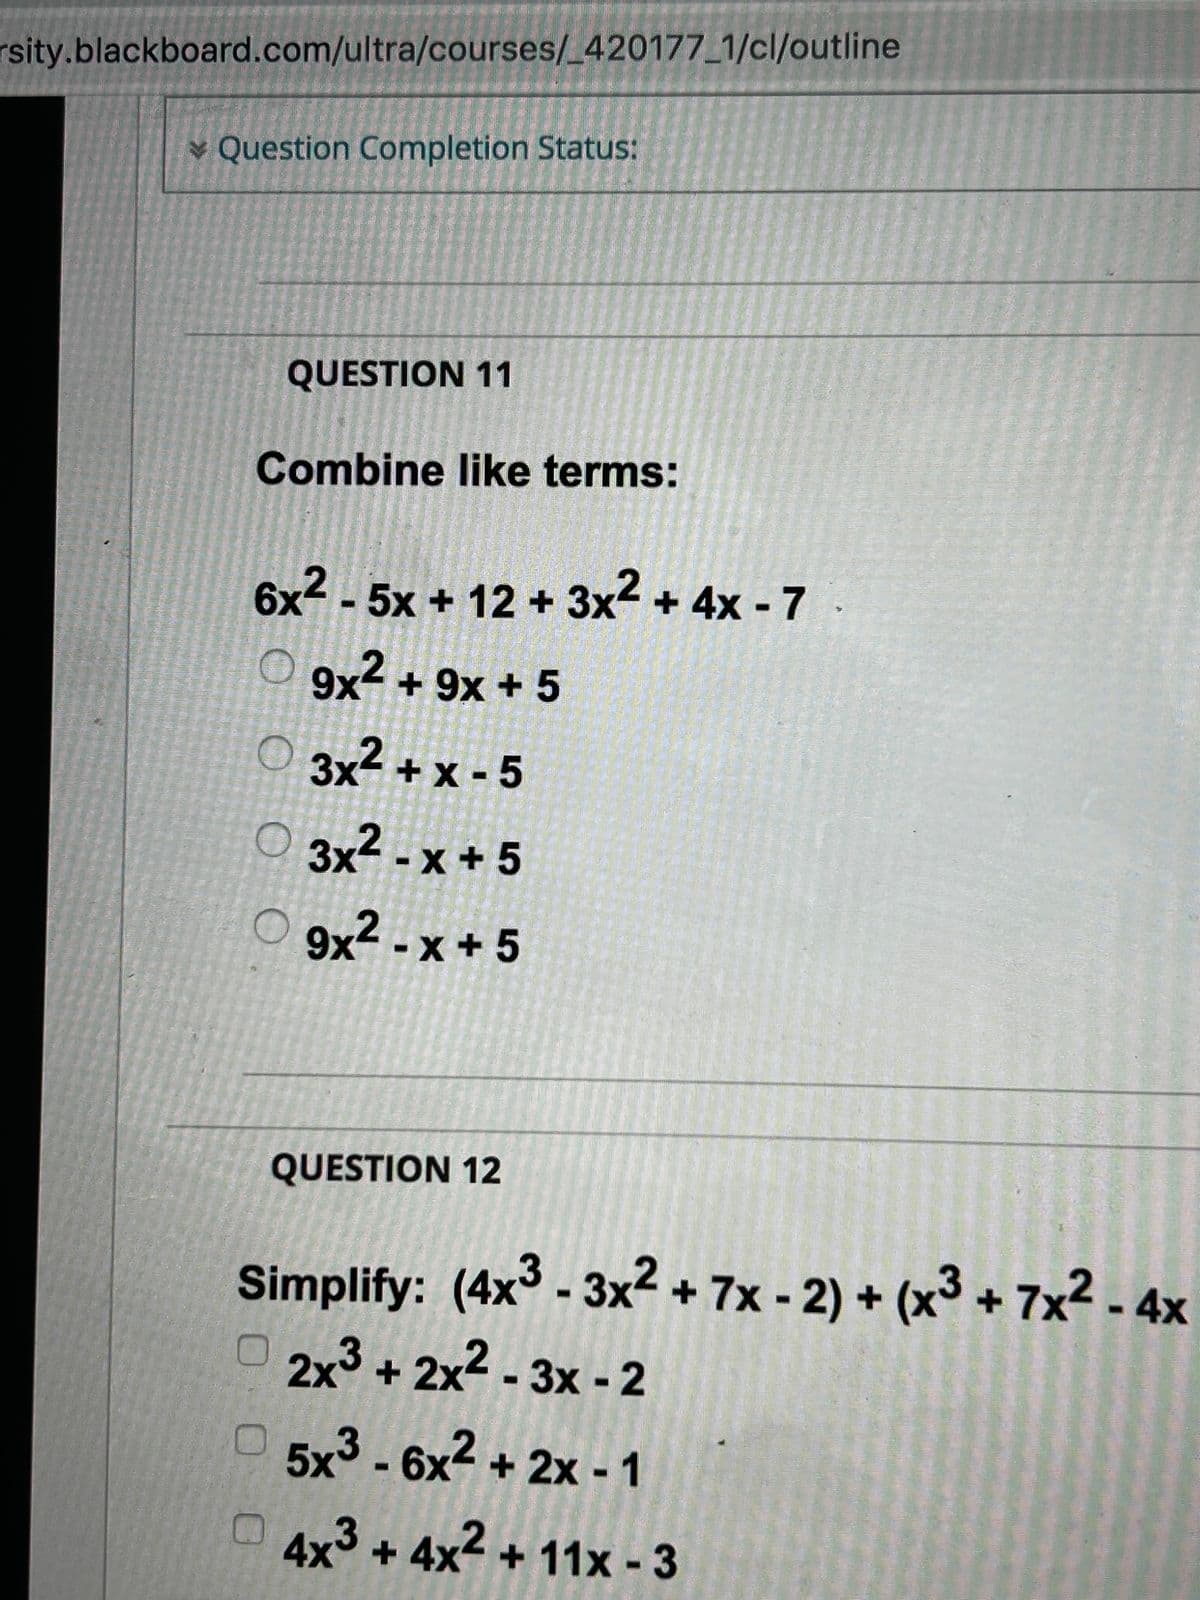 rsity.blackboard.com/ultra/courses/_420177_1/cl/outline
Question Completion Status:
QUESTION 11
Combine like terms:
6x²-5x + 12 + 3x² + 4x - 7
O9x² + 9x + 5
3x²+x-5
3x²-x+5
9x²-x+ 5
QUESTION 12
Simplify: (4x³-3x² + 7x - 2) + (x³ + 7x² - 4x
2x³ + 2x²-3x - 2
5x³-6x² + 2x - 1
4x³+4x²+ 11x - 3